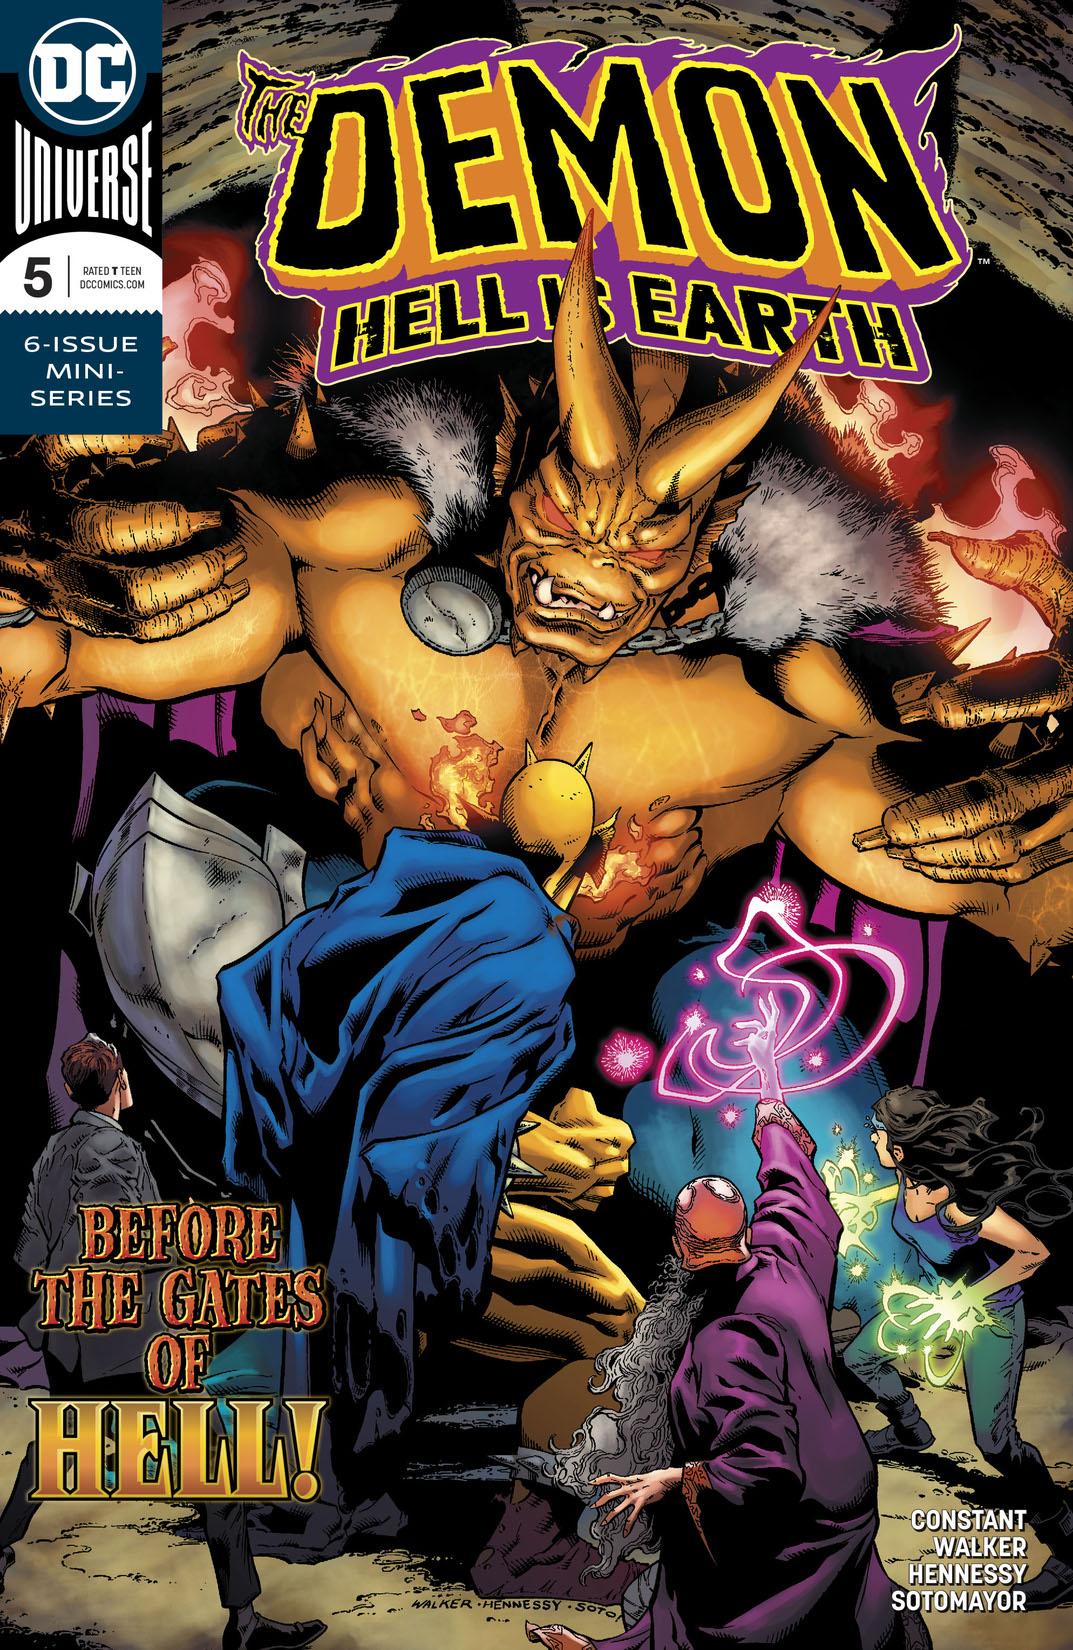 The Demon: Hell is Earth #5 preview images